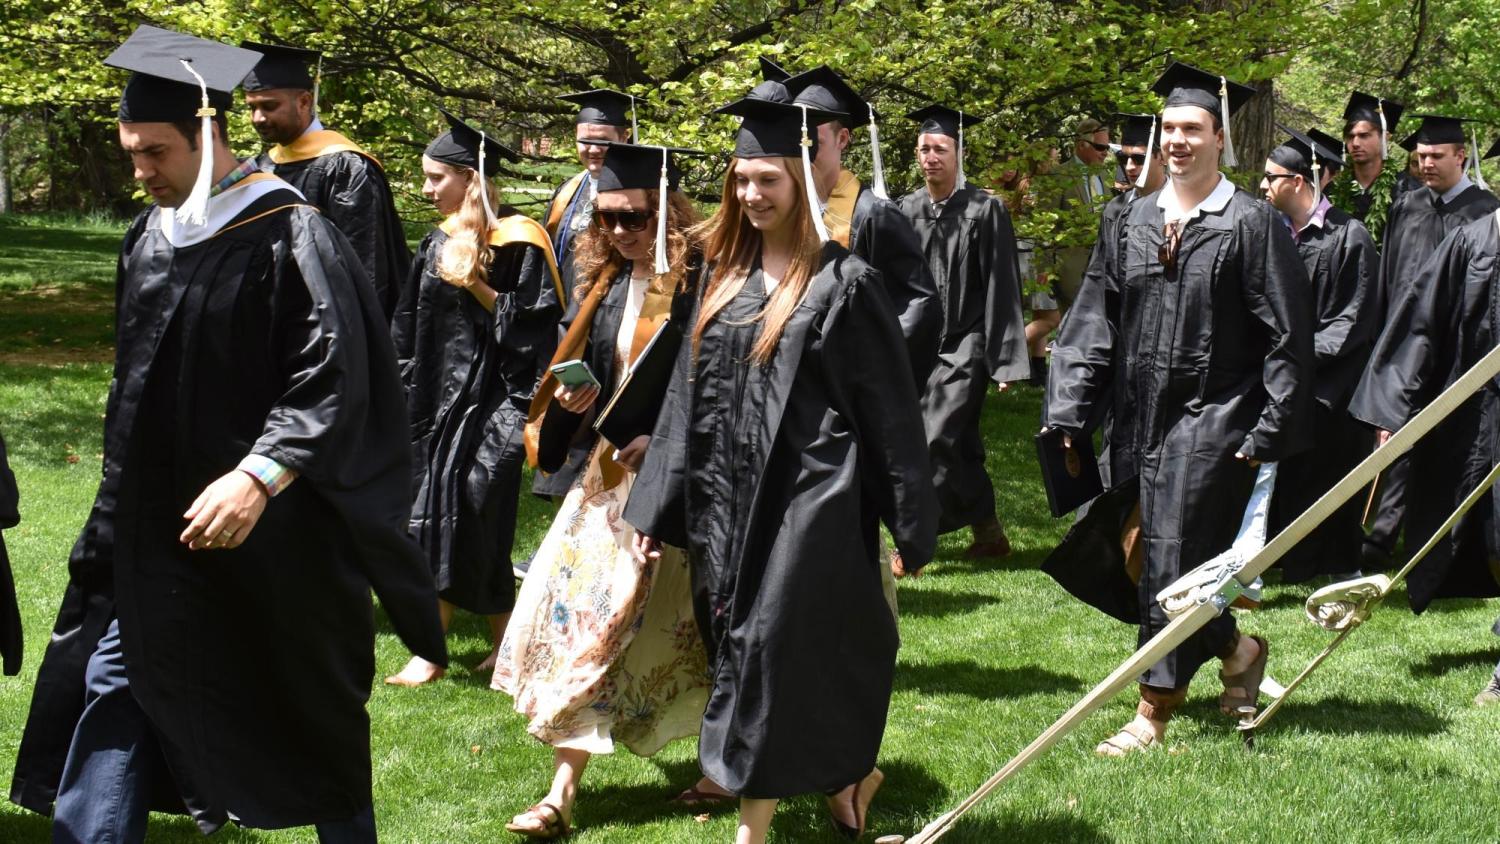 Students walking in graduation gowns